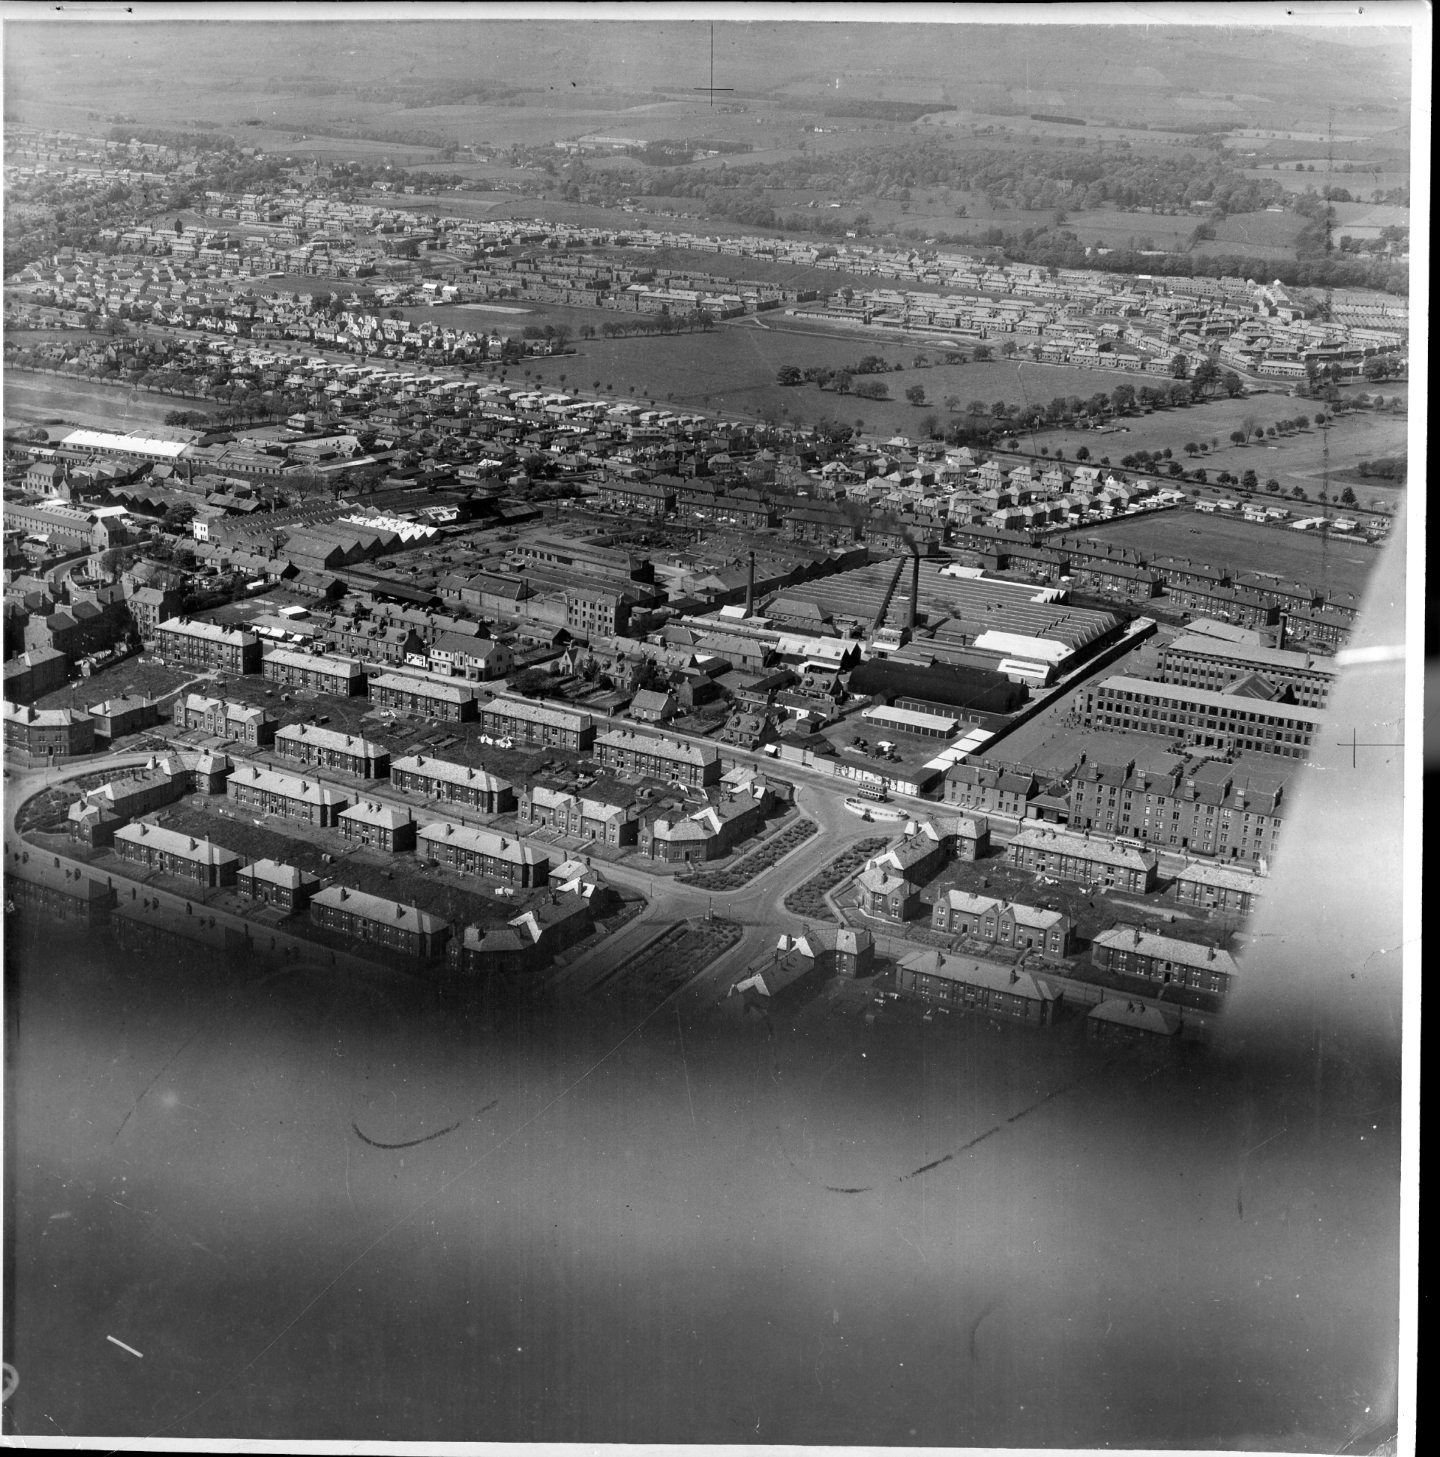 A photo showing part of the Fleming Gardens Housing Scheme; St Michael's School on the right. Image: DC Thomson.